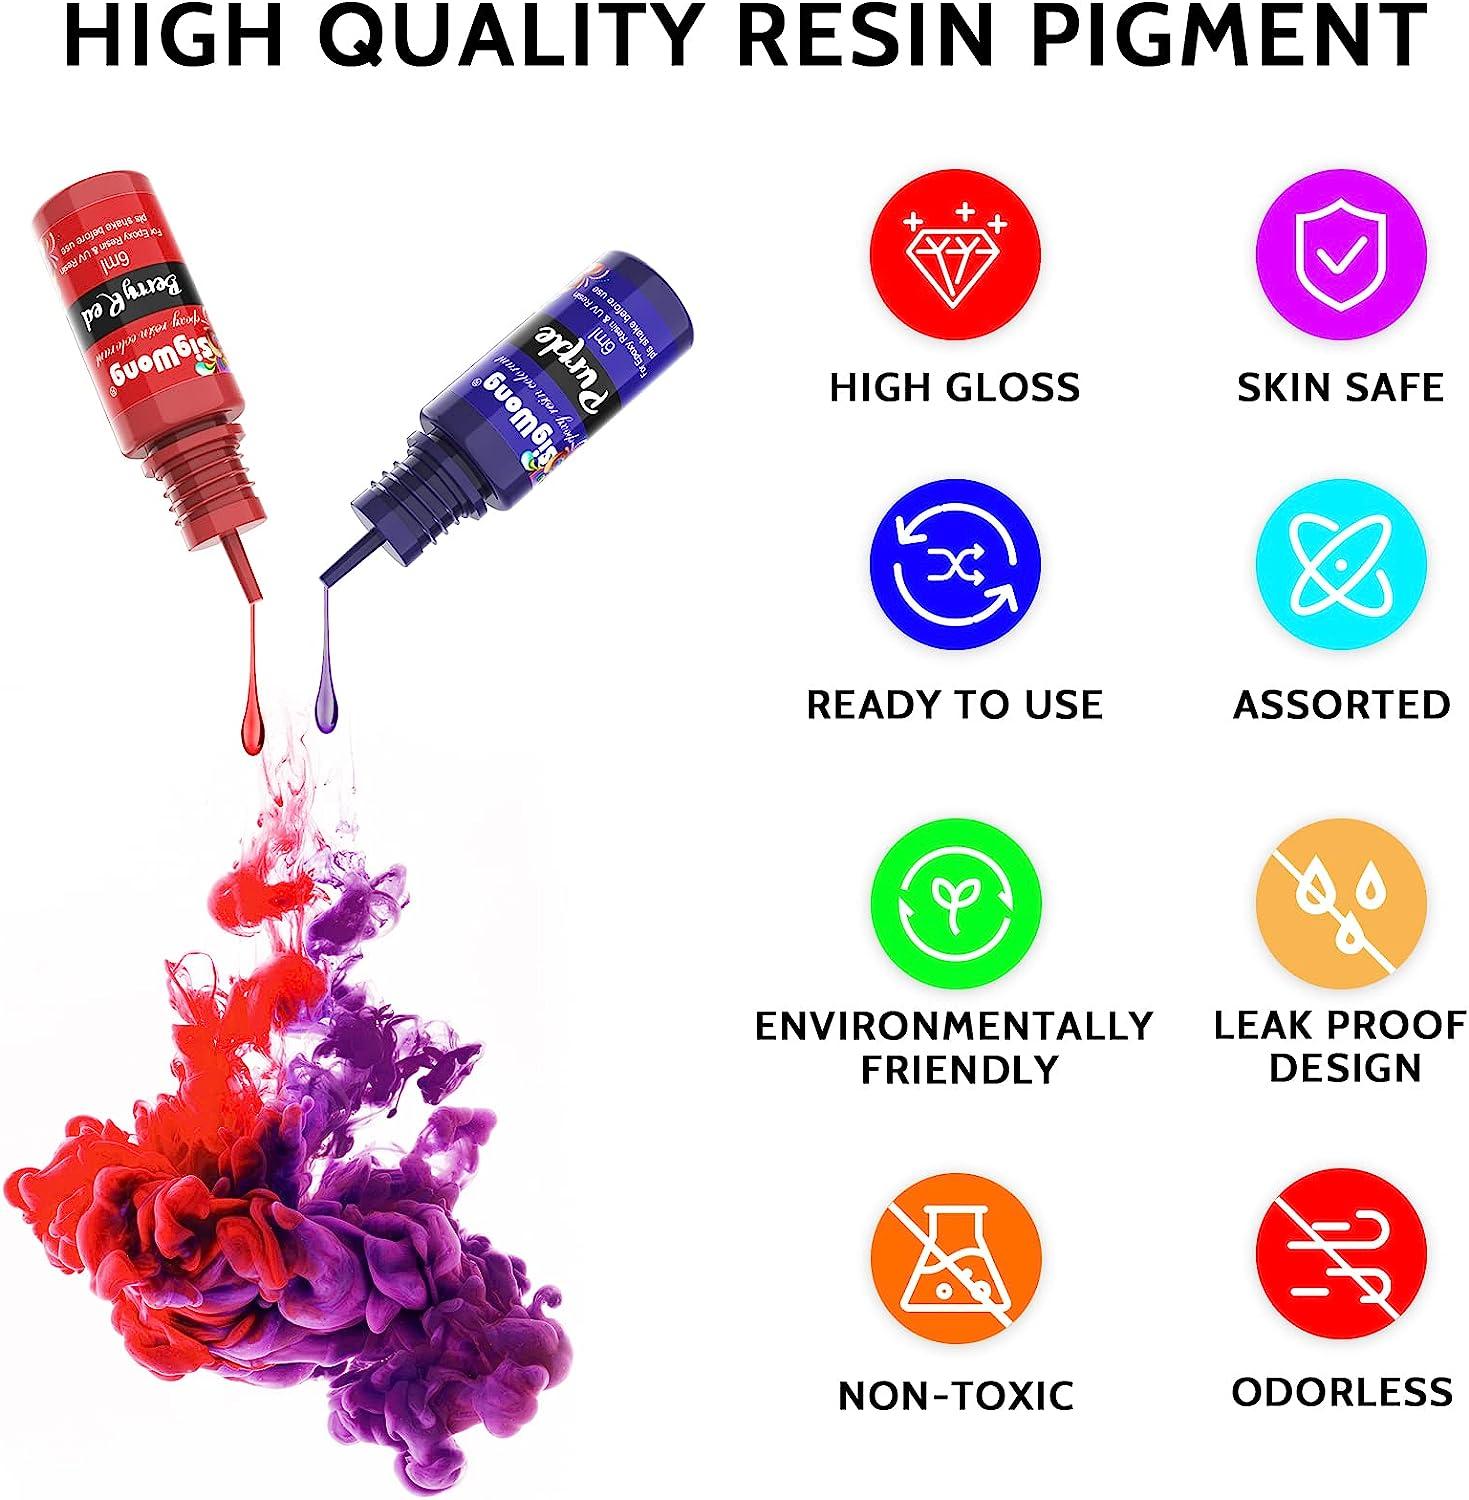 Epoxy Resin Pigment - 24 Colors Liquid Translucent Epoxy Resin Colorant,  Highly Concentrated Dye for DIY Jewelry Making, Paint, Craft - 6ml Each,  with